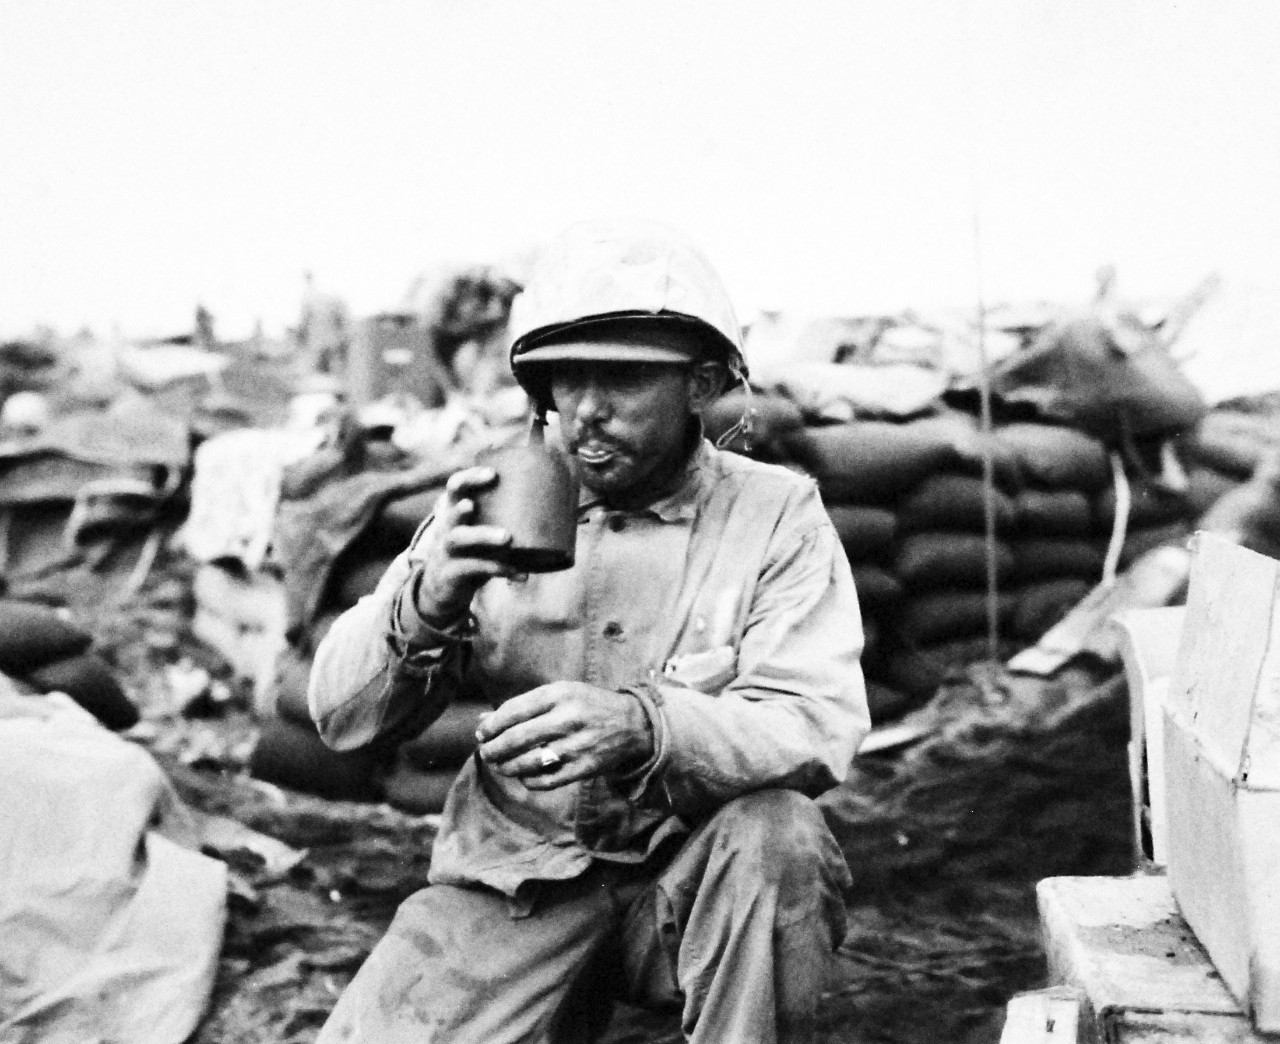 127-GW-321-109806: Iwo Jima Operations, February-March 1945.   Sergeant Alfred Metivier, USMC, sits on the beach at Iwo Jima after a grueling night at his 75 art.  Piece drinking a “cup” of coffee. The container used is a cop from a 75mm shell case.   Photographed by L.W. Weber, February 1945.  Official U.S. Marine Corps Photograph, now in the collections of the National Archives.  (2016/09/06).